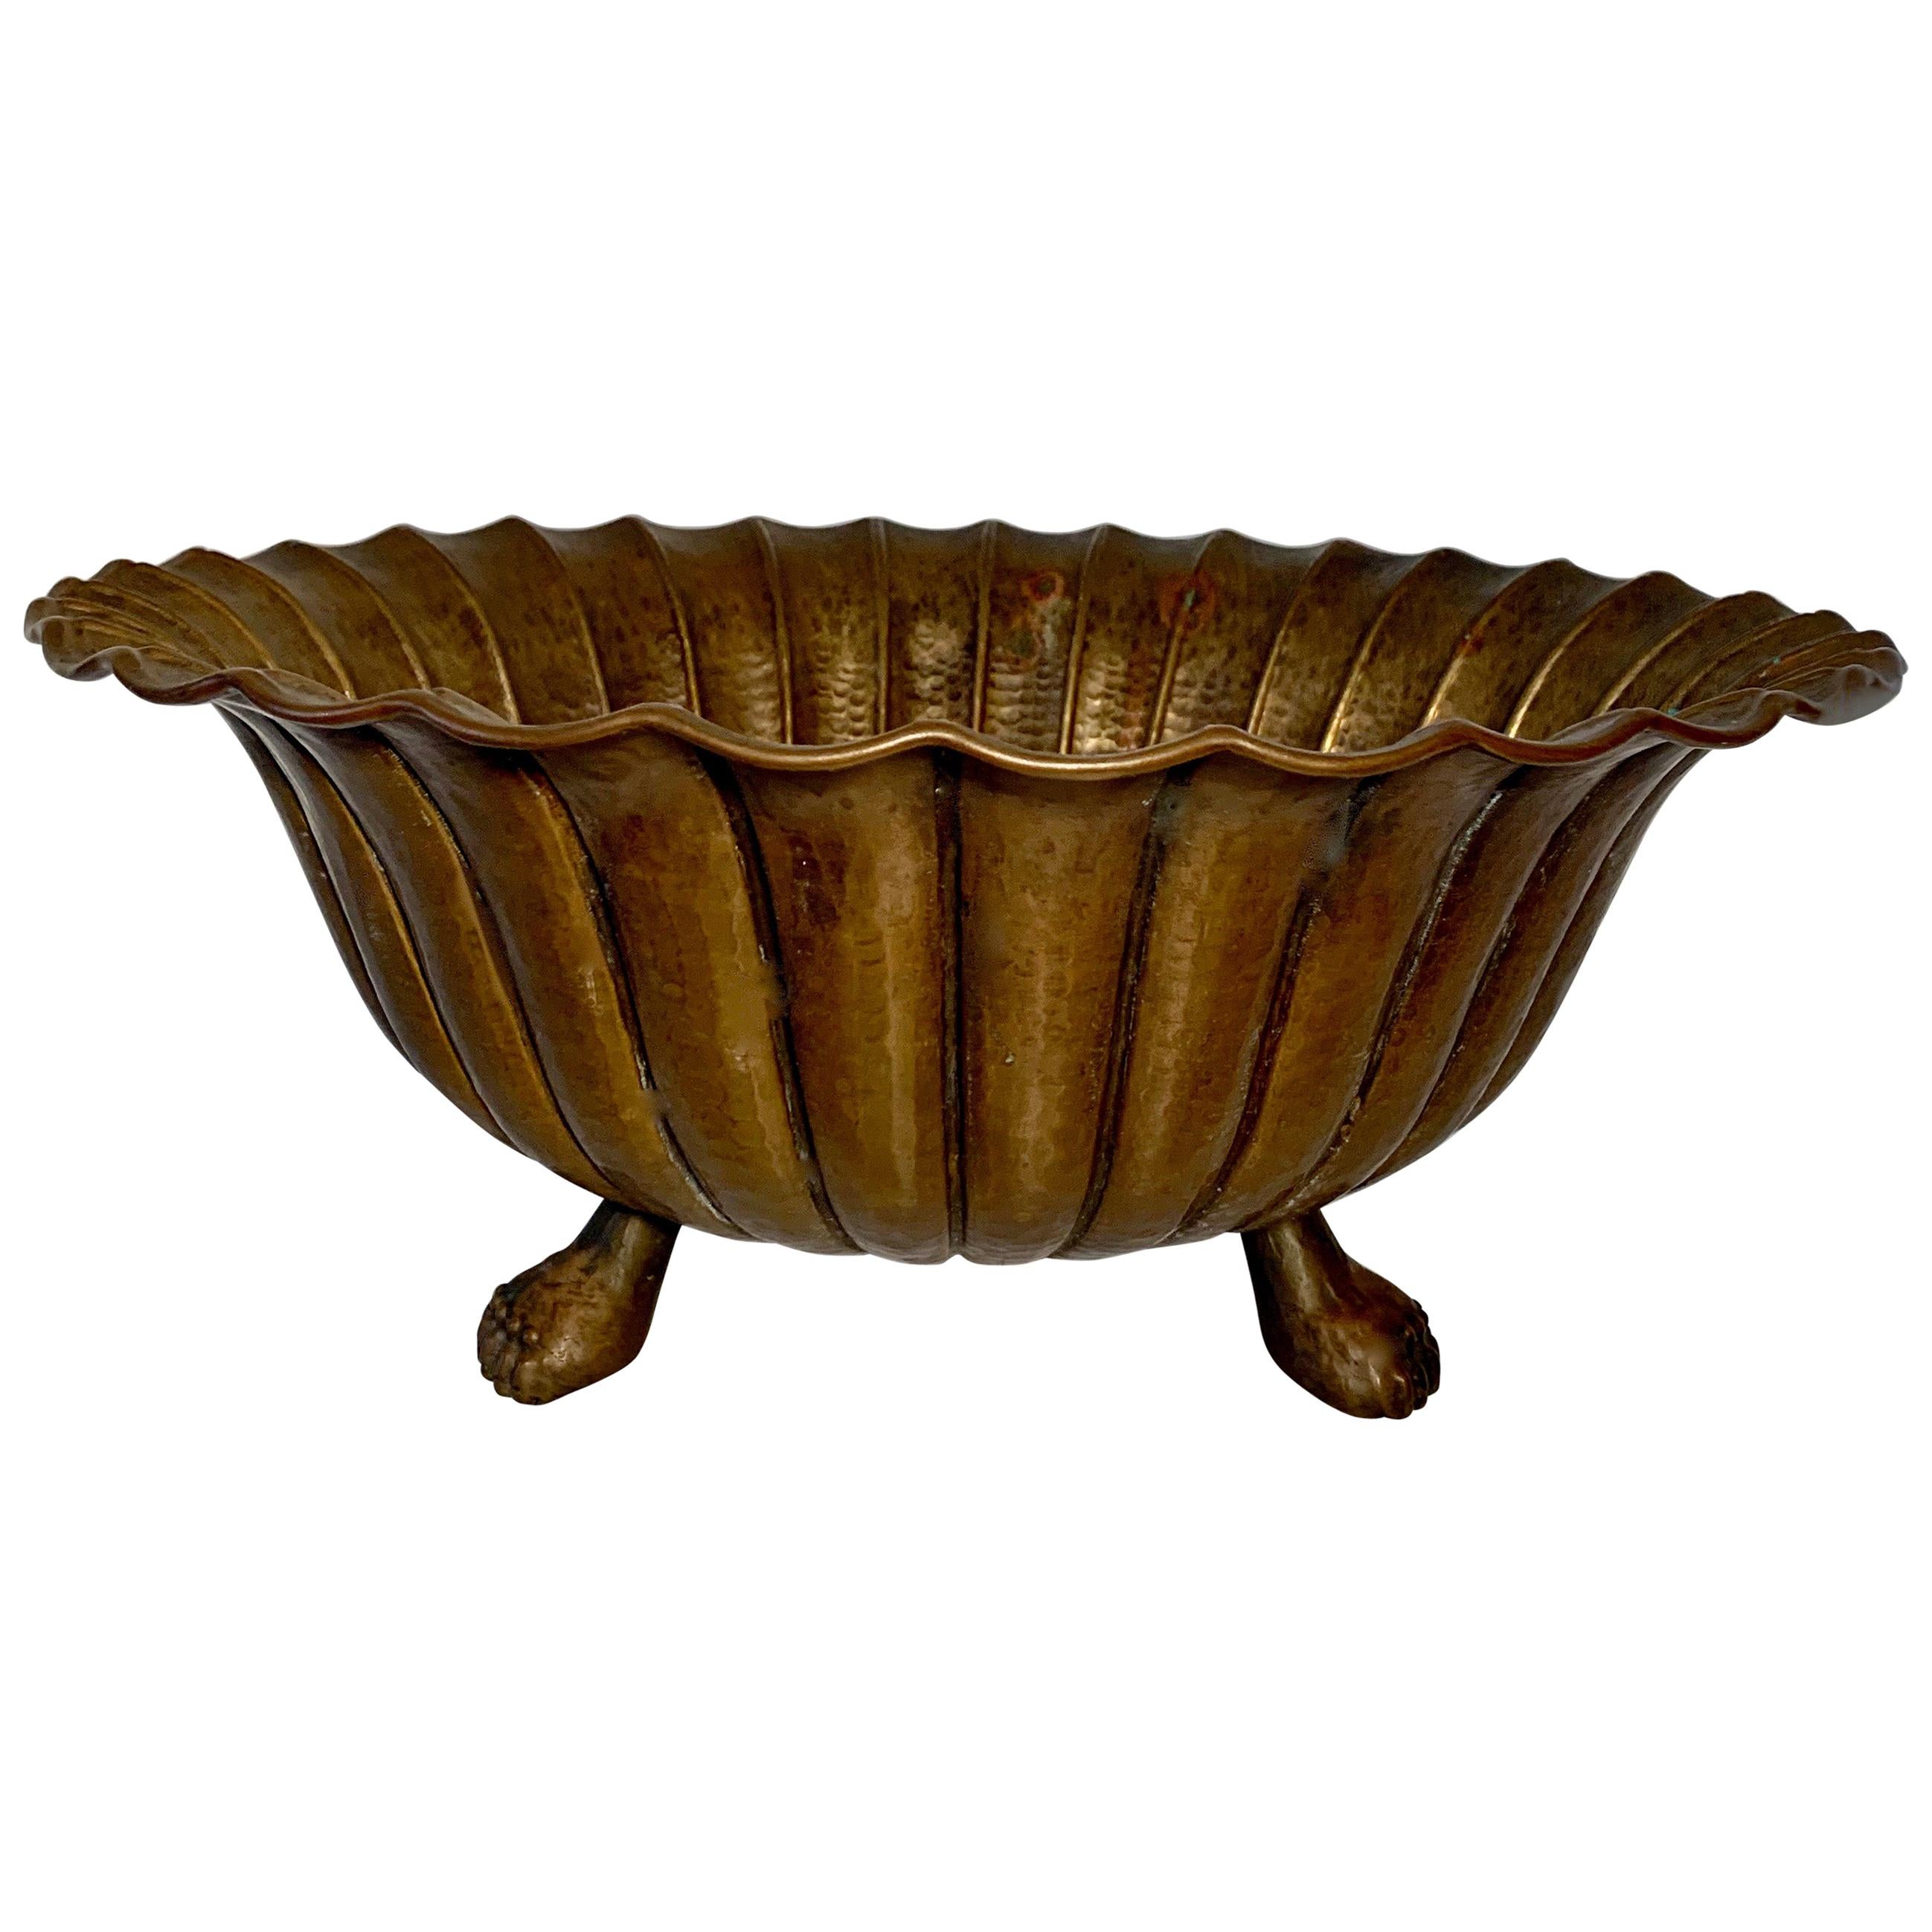 A monumental Egidio Casagrande Italian hammered footed bowl in brass. A rare and handsome bowl patinated to perfection.  A compliment to any shelf or wonderful fruit, serving or center bowl. 

Also great for mail, a catch all or decorative